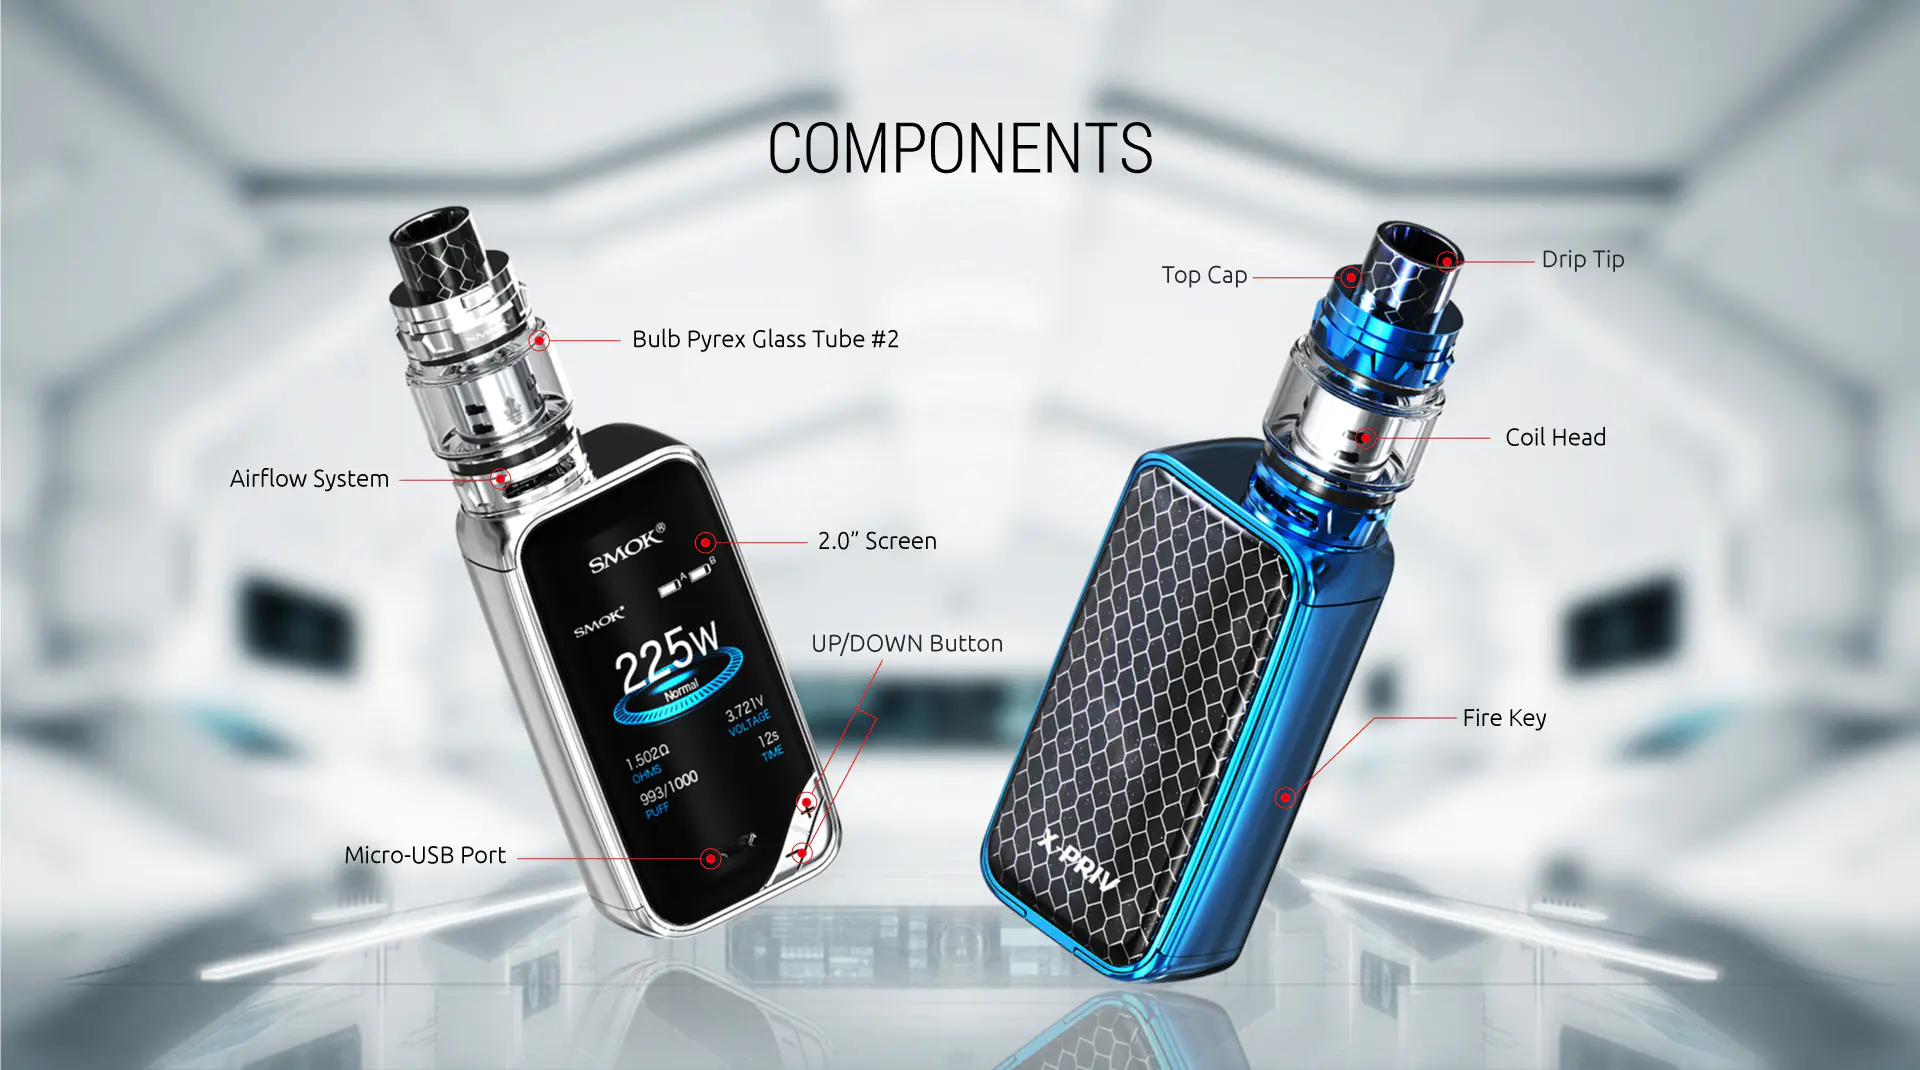 The Components of SMOK X-Priv Kit